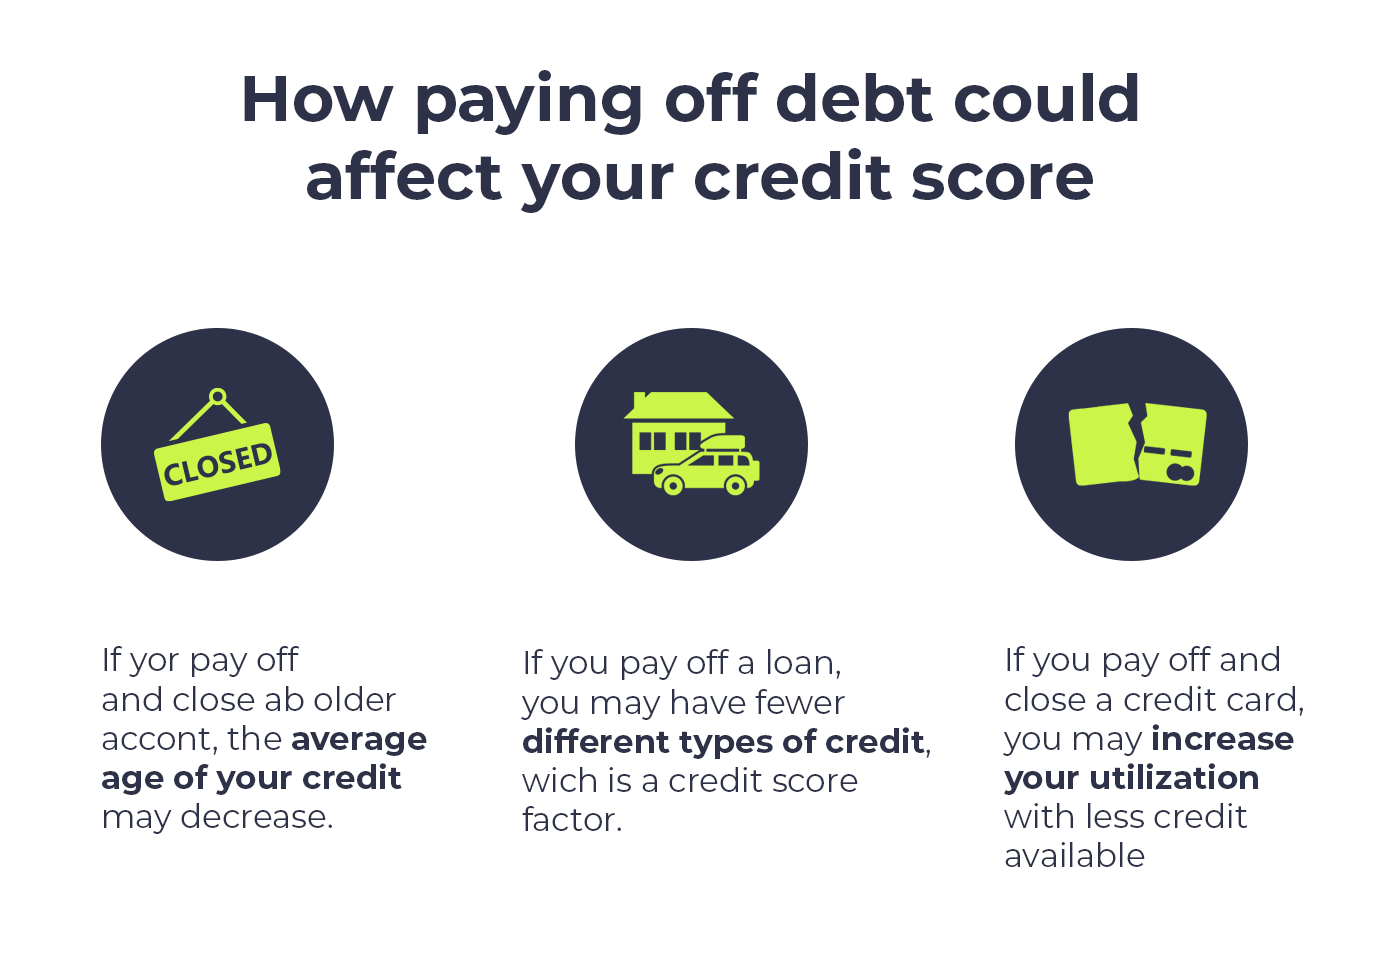 Does Paying Off a Loan Early Hurt Your Credit